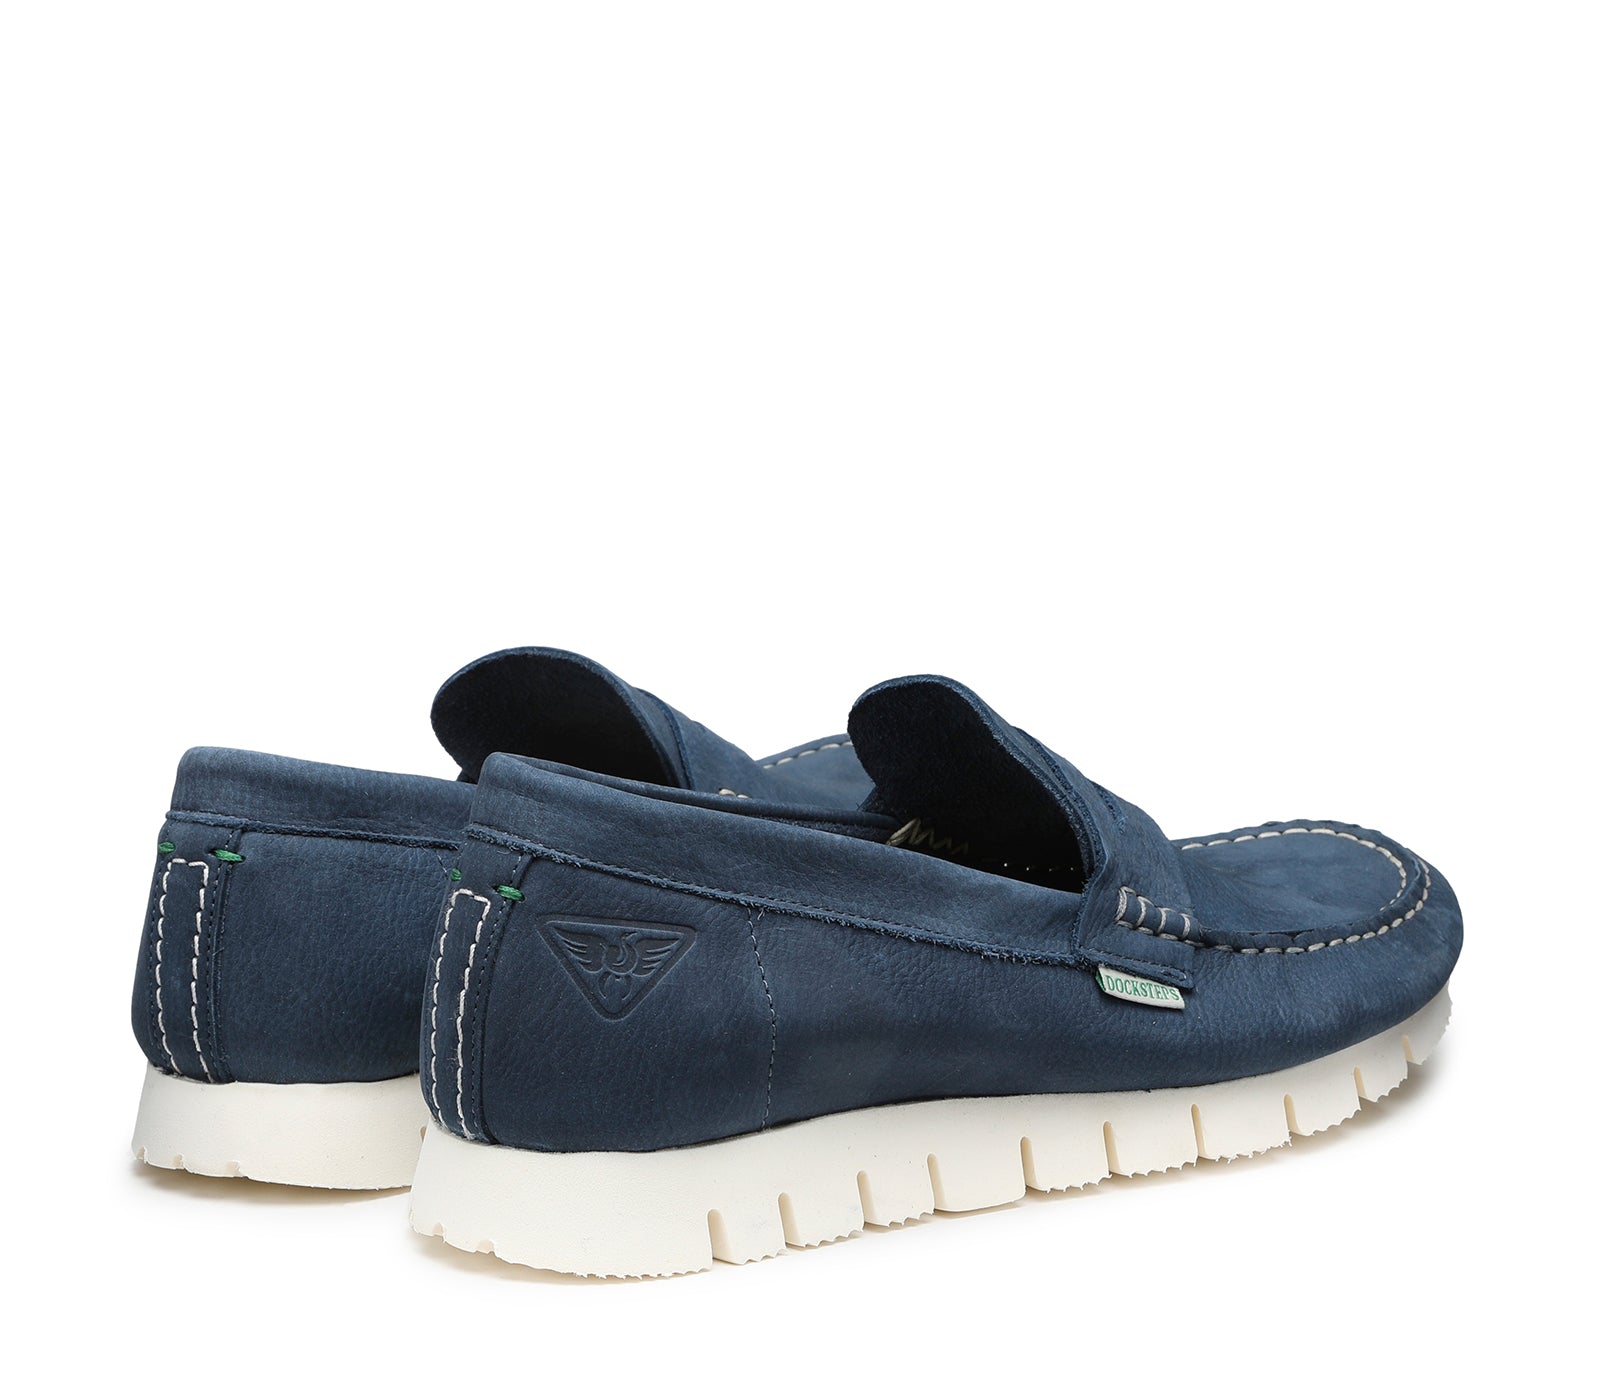 Sustainable Moccasin in Navy Blue Nubuck and White Sole